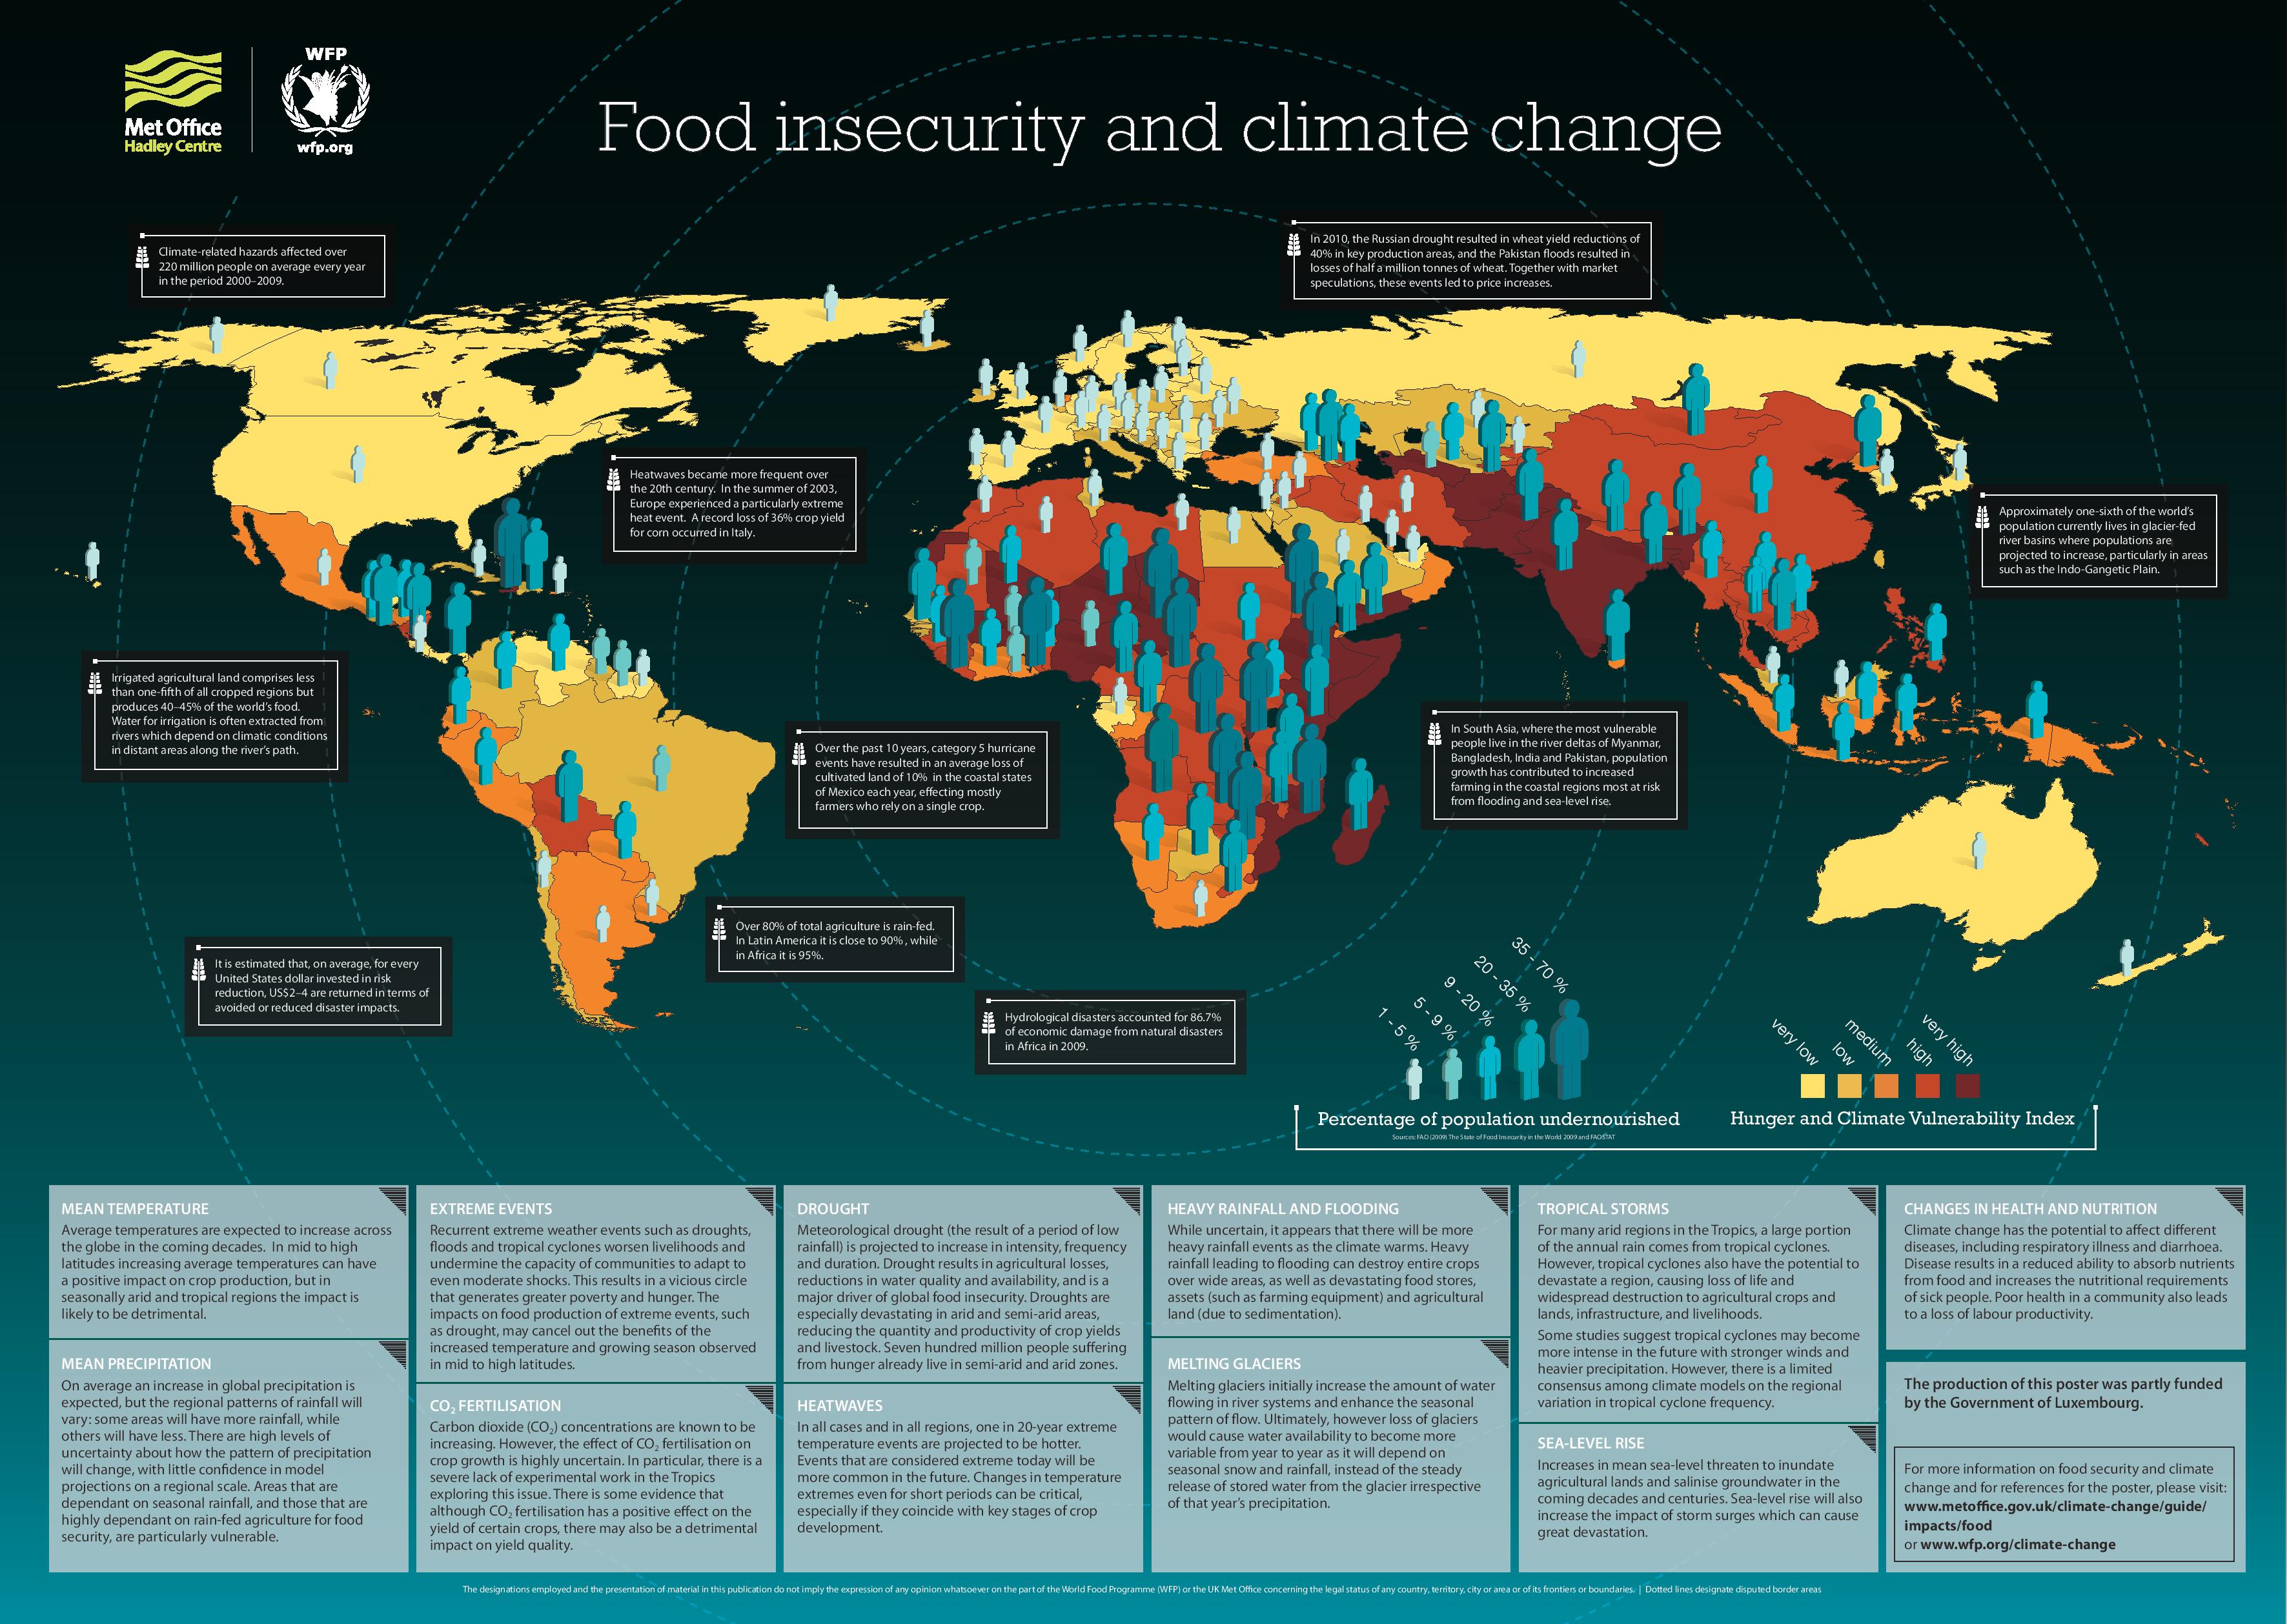 Animal Agriculture, Climate Change, & Food Insecurity